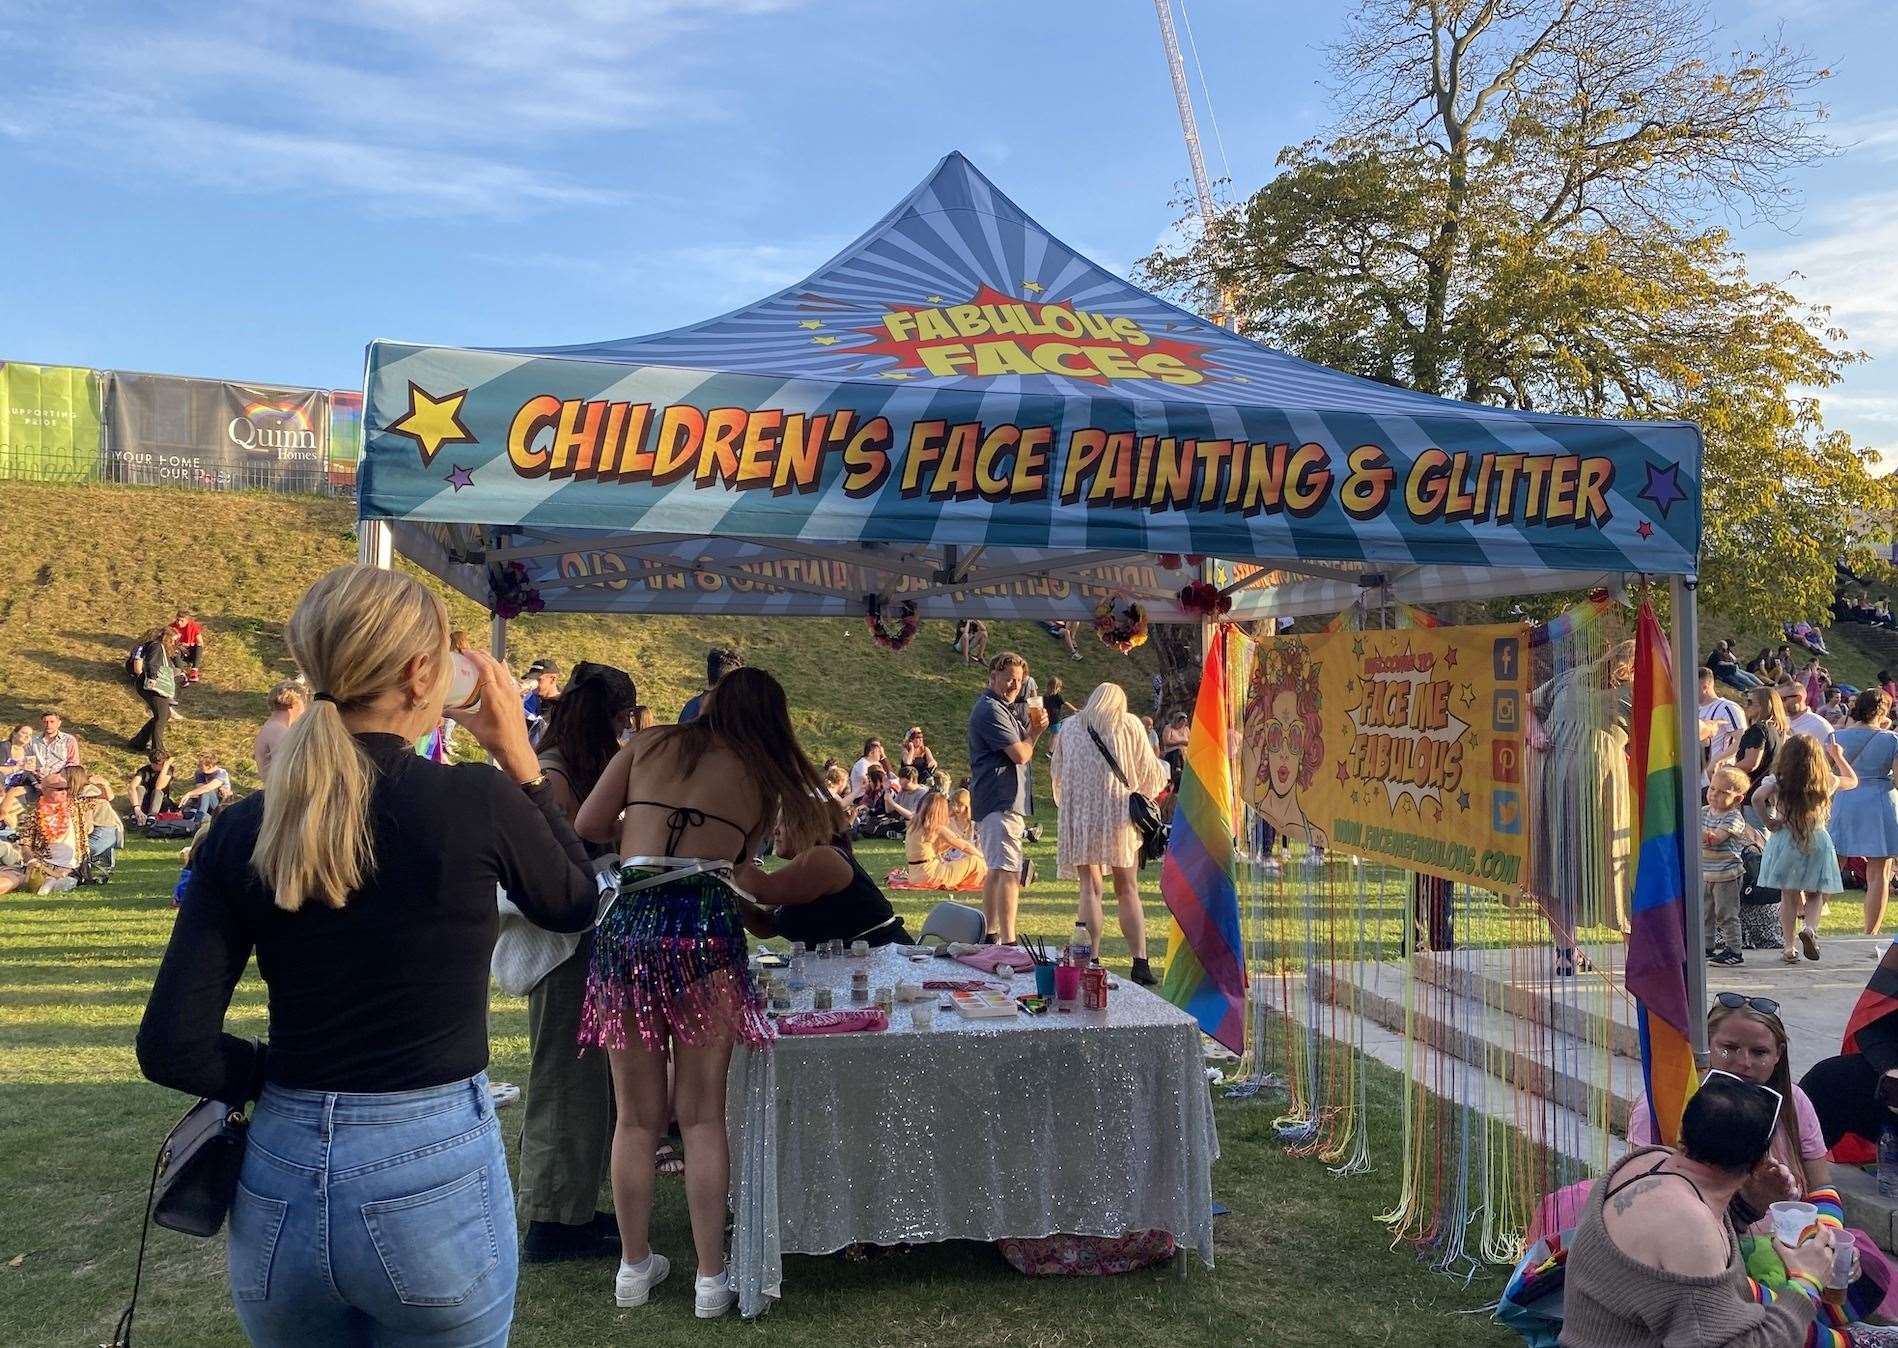 The event claimed to be family friendly and hosted a children's tent at the back of the crowd